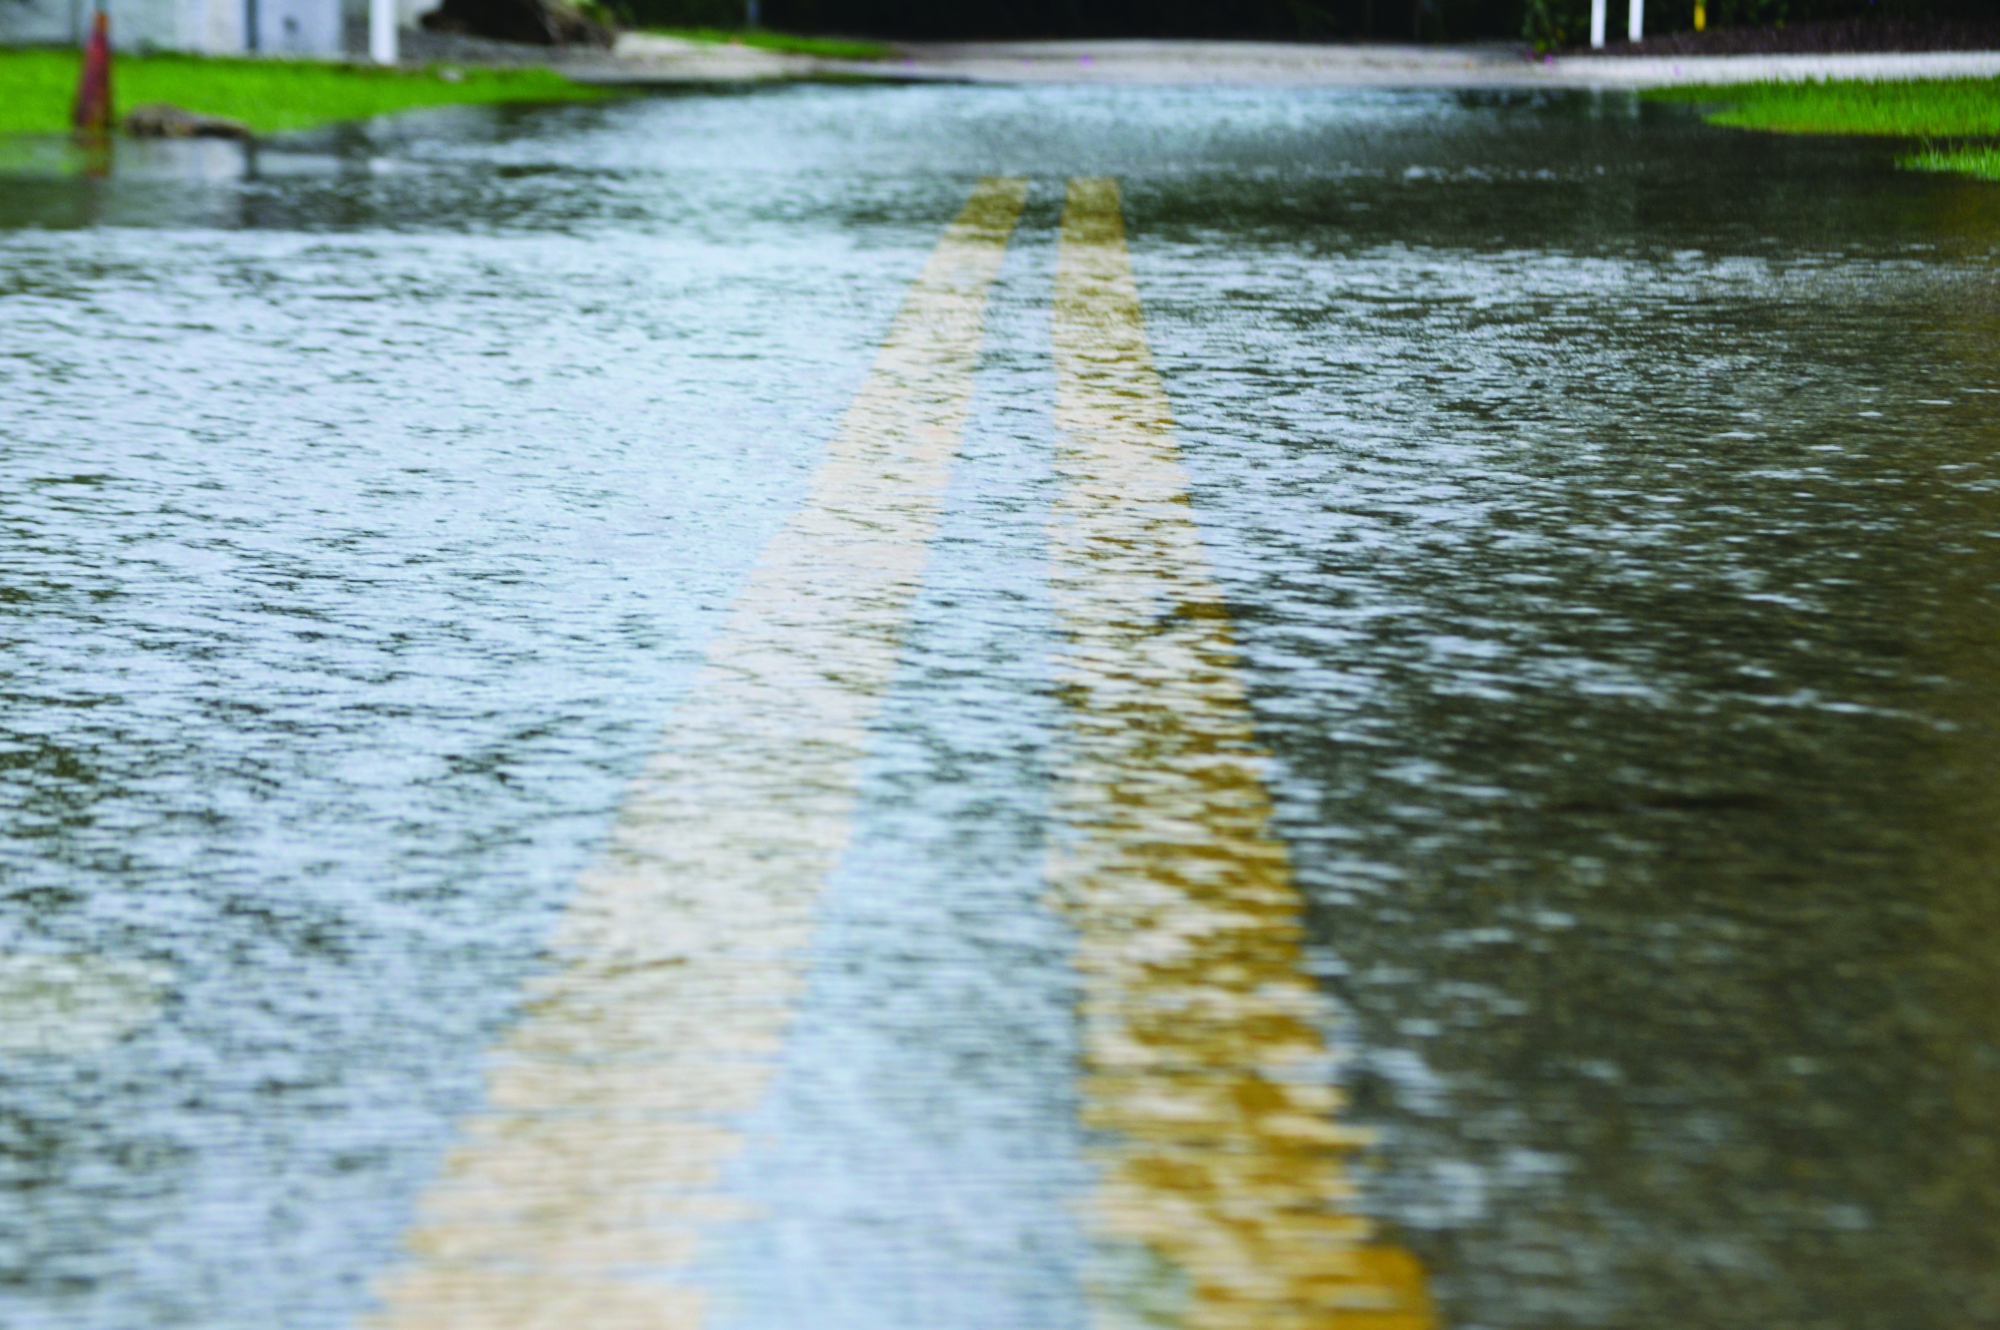 Roads flooded during the storms this summer, but Sarasota avoided real disaster.